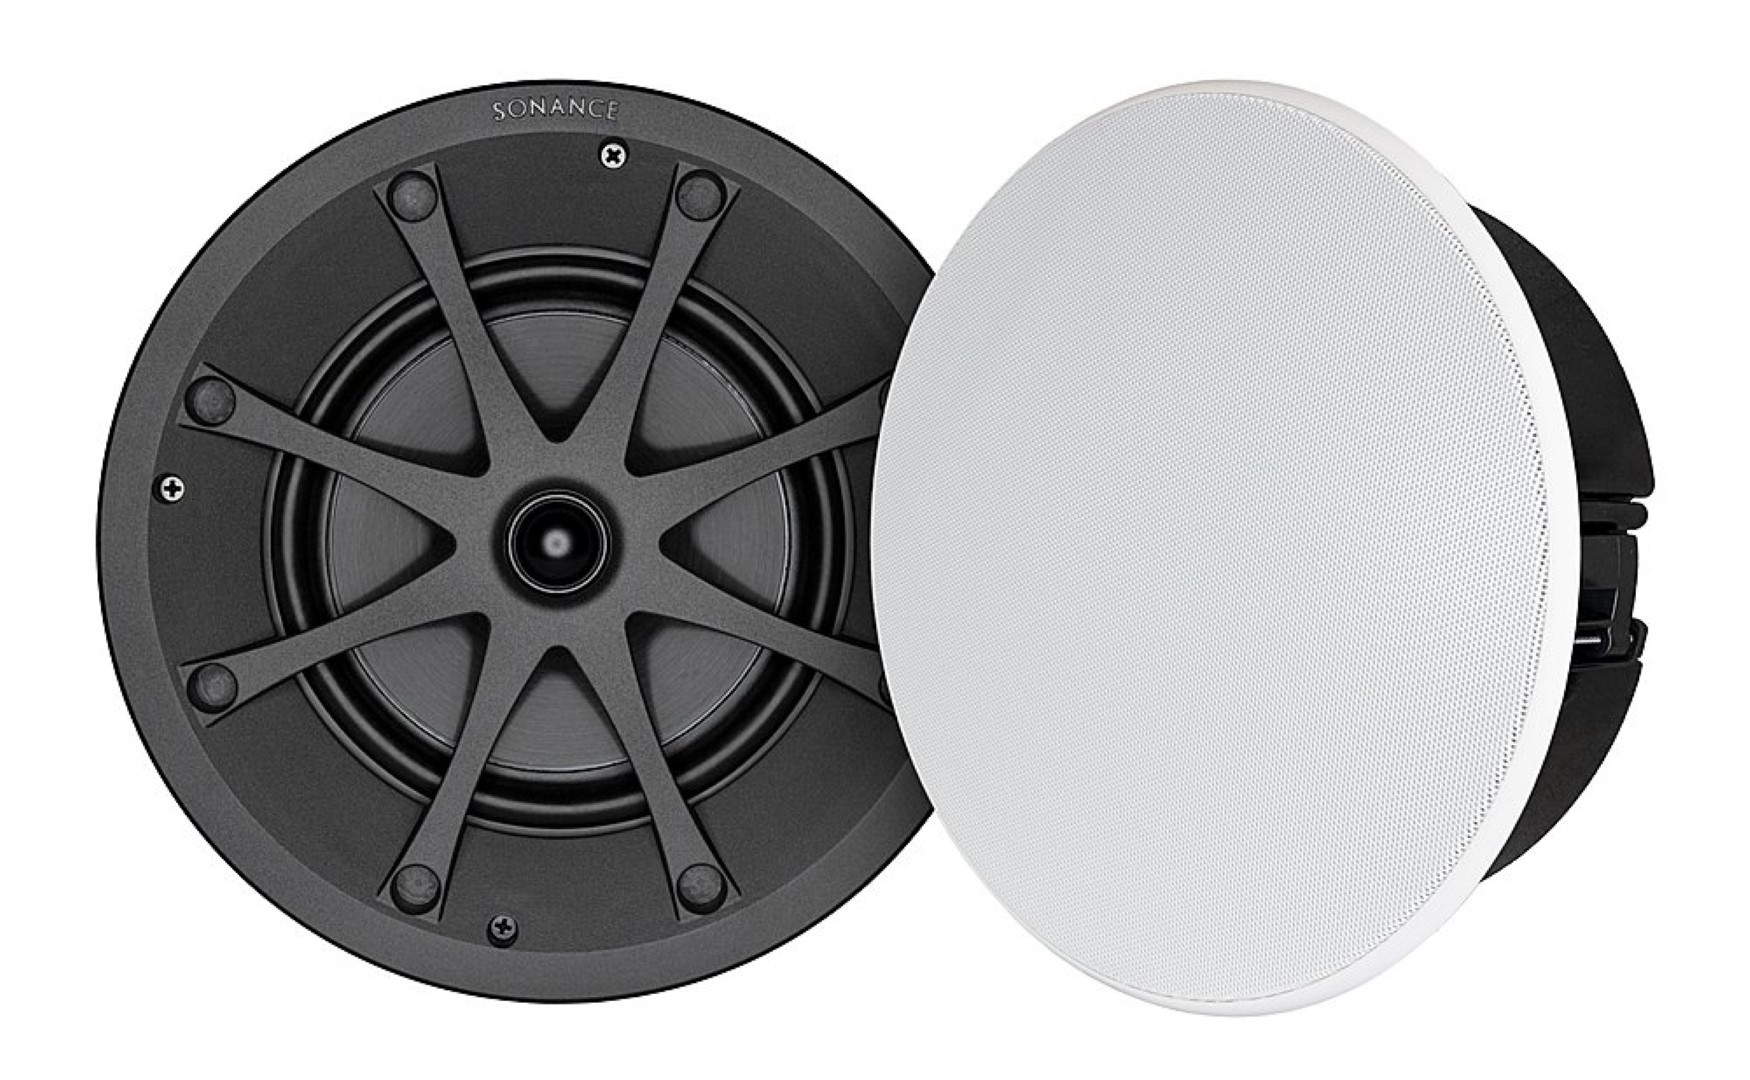 Sonance VPXT8R Visual Performance Extreme 8" 2Way In-Ceiling Speakers (Pair)